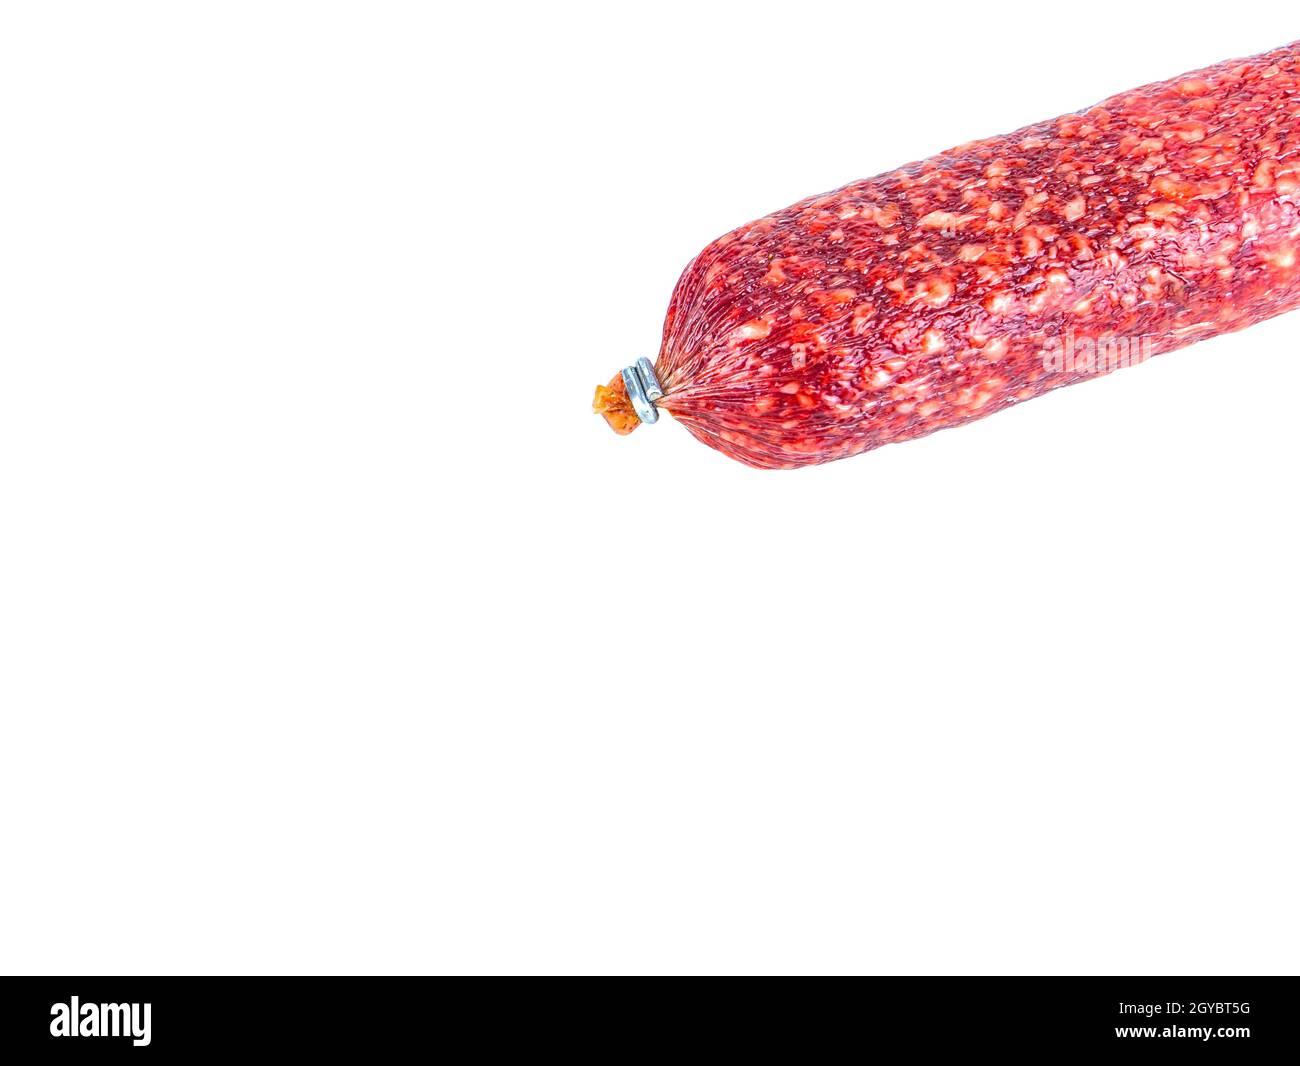 Meat product sausage on a white background. Pork sausage. Beef meat. Home kitchen. Fatty food. Unhealthy food. Calories. Showcase of a butcher's shop. Stock Photo